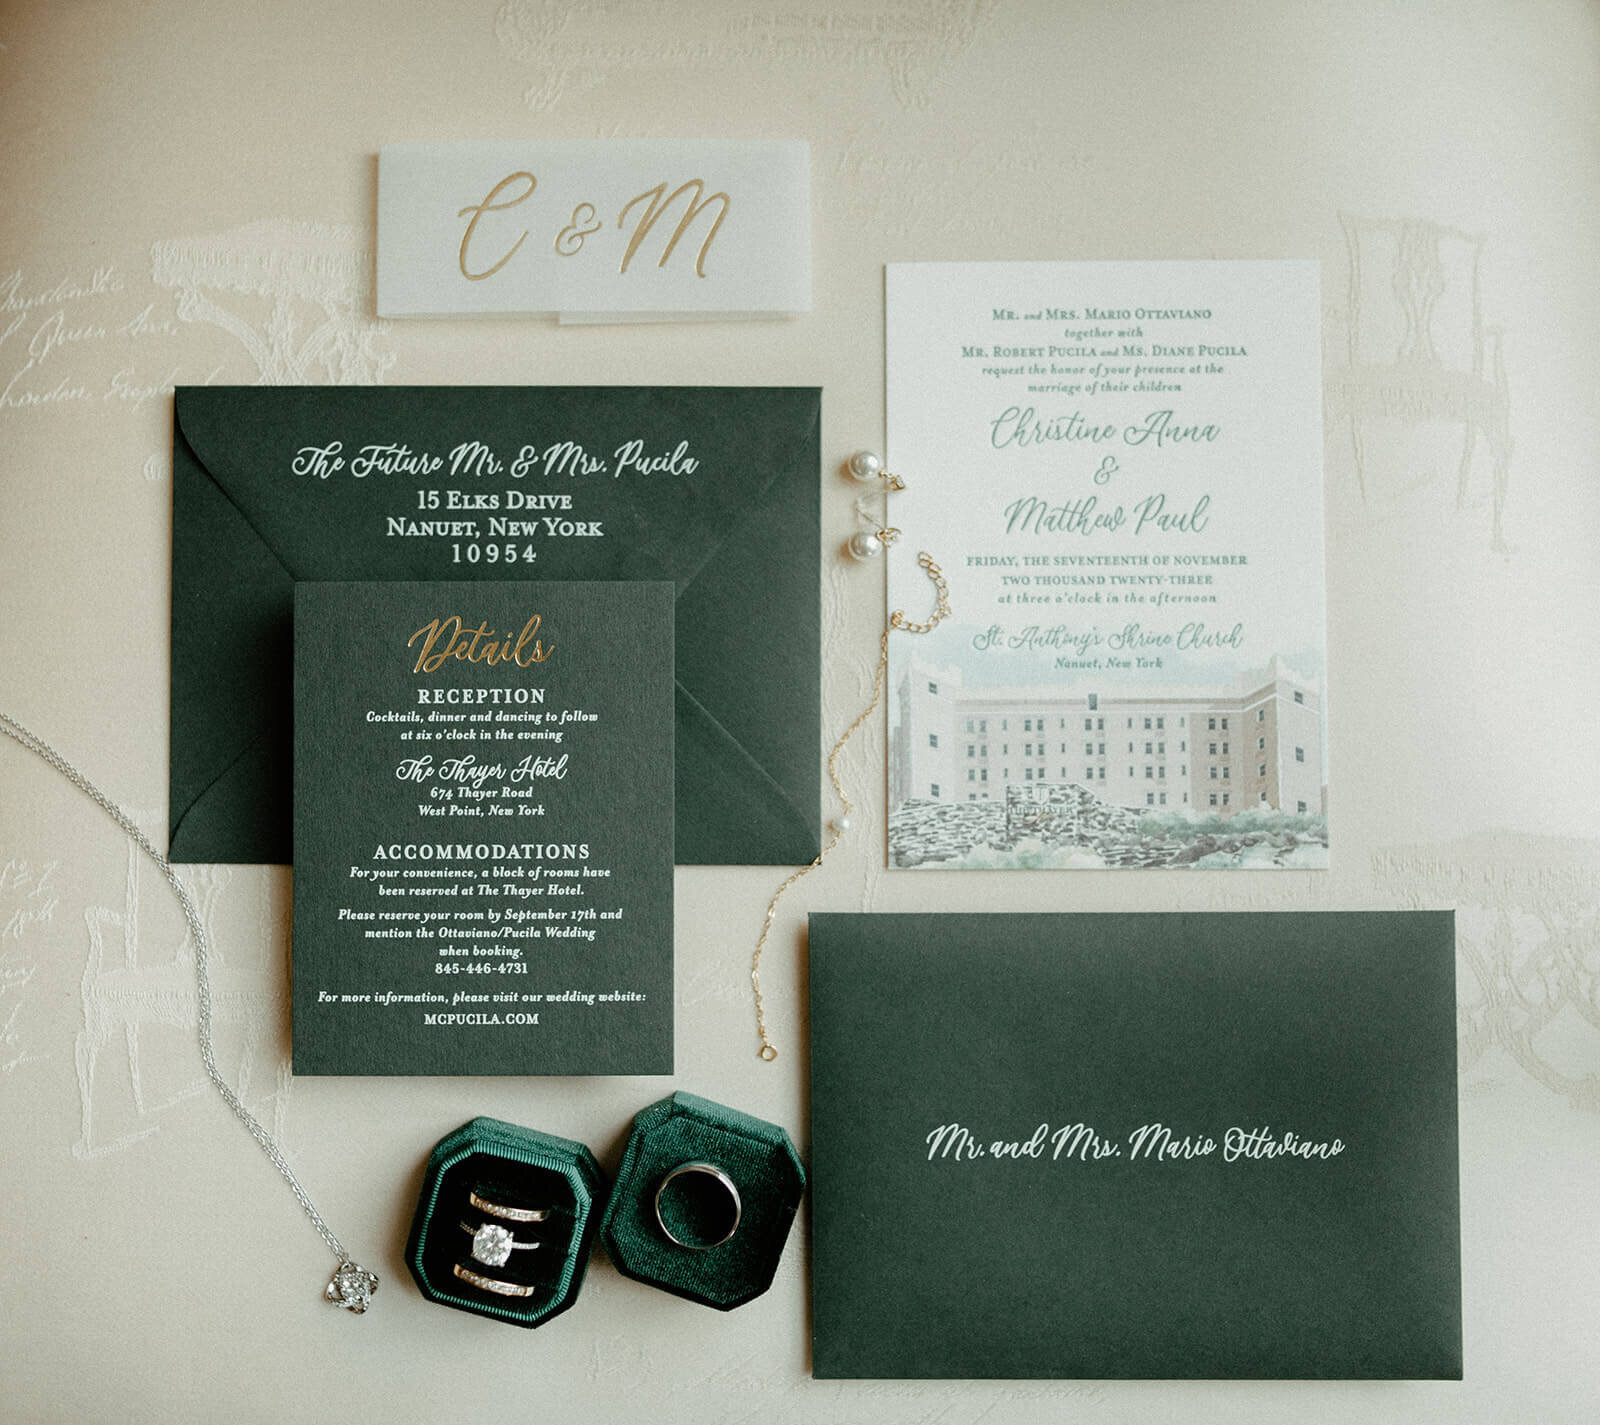 SGH Creative Luxury Wedding Signage & Stationery in New York & New Jersey - Full Gallery (20)